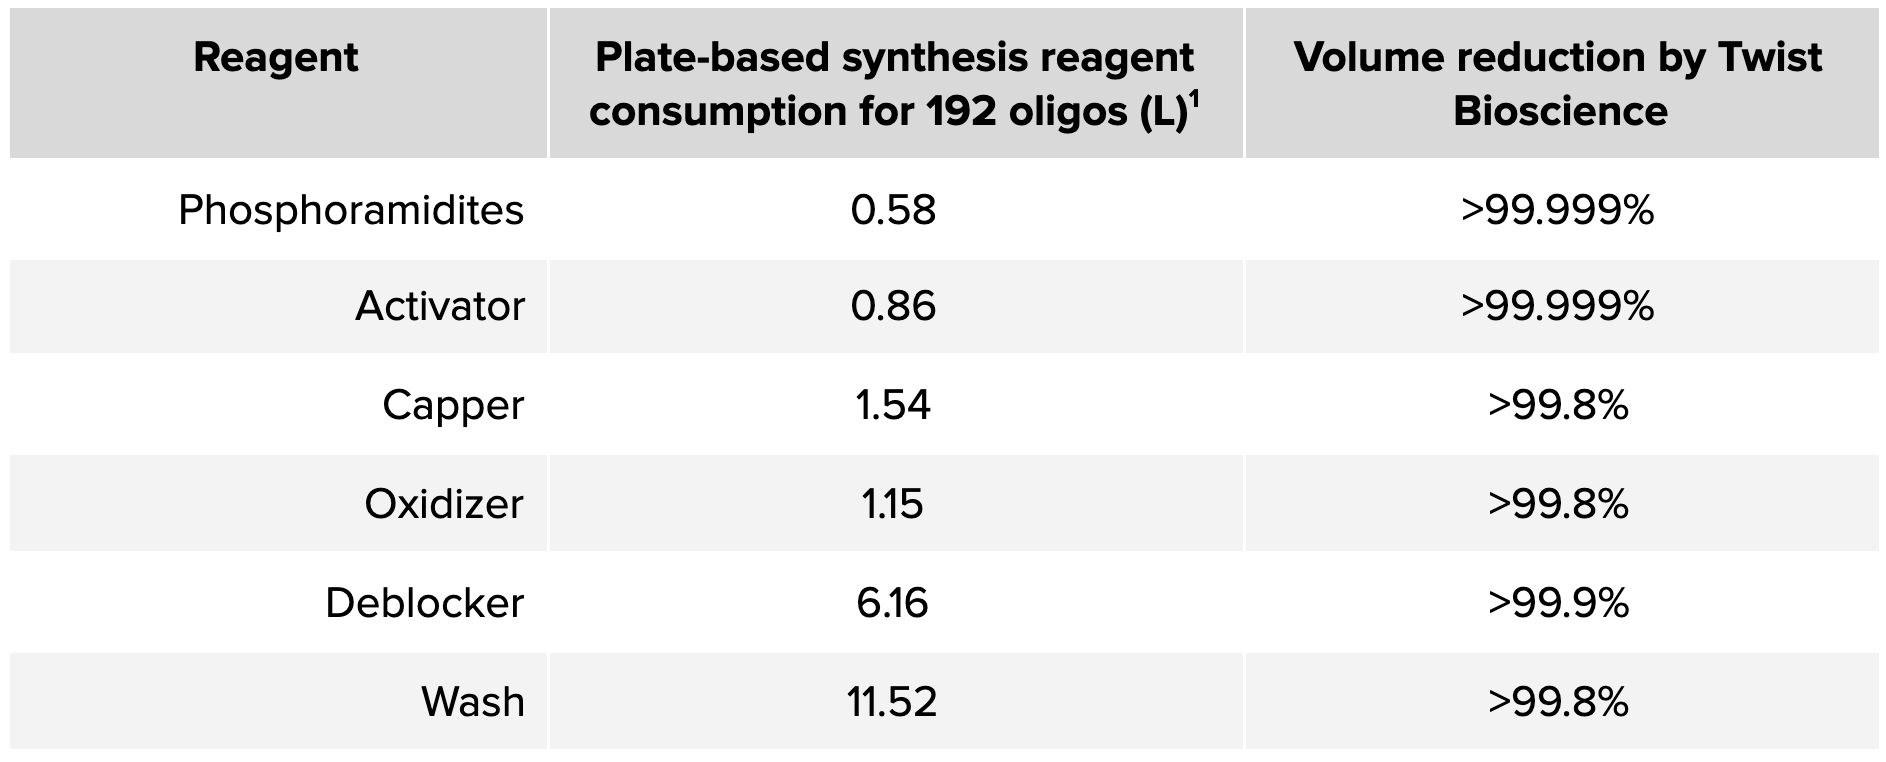 Twist Bioscience has reduced reagent volumes by at least 99.8% for oligo synthesis